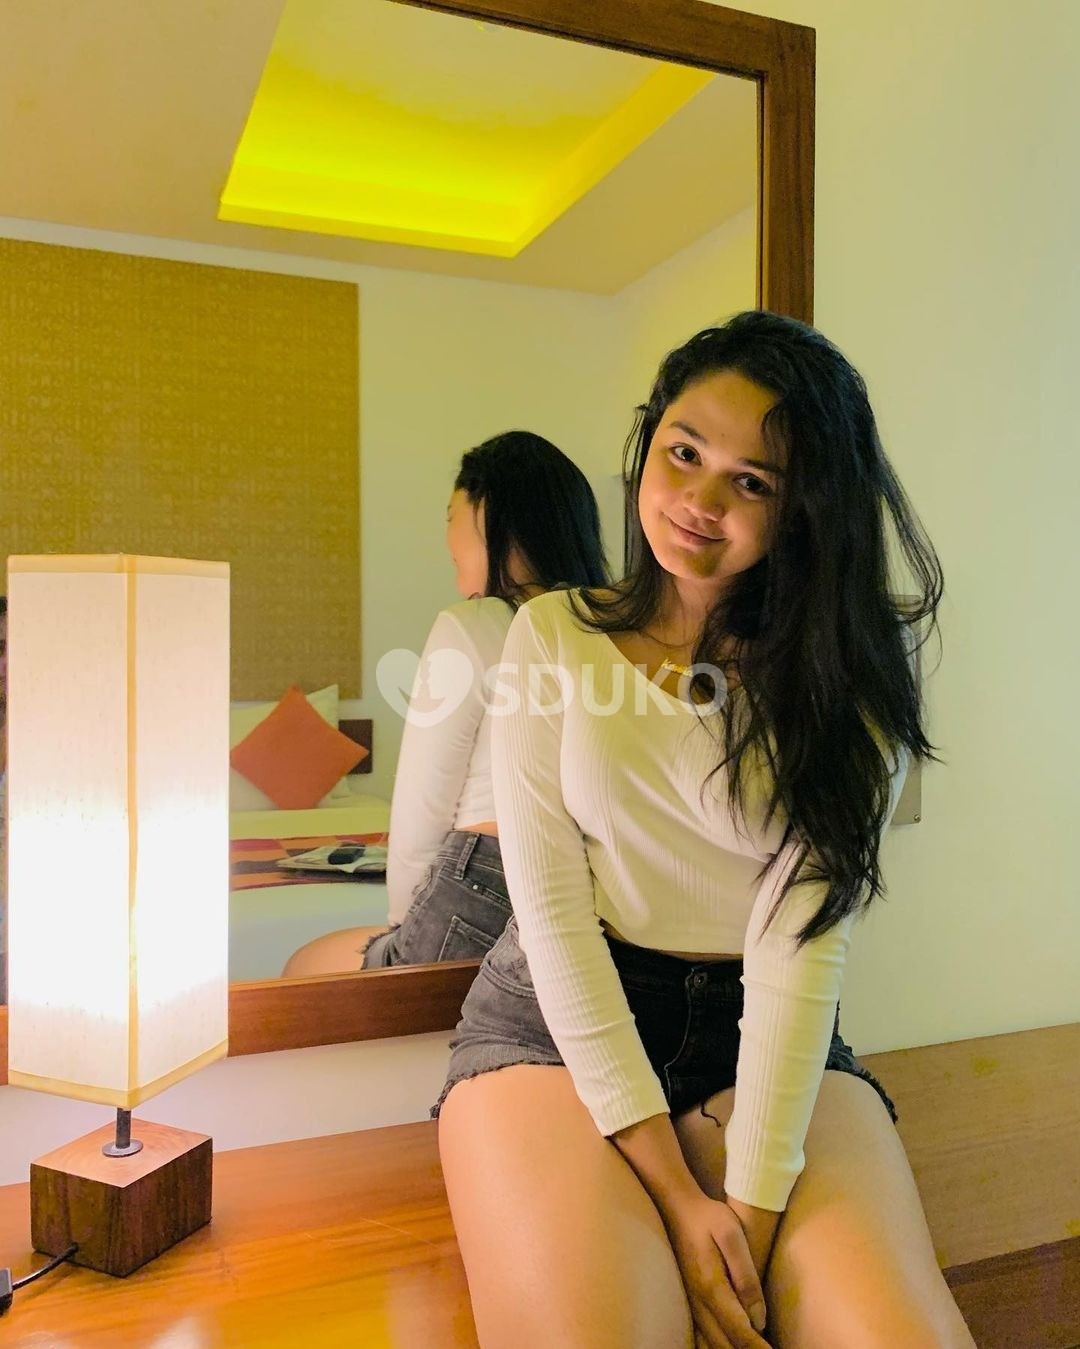 SECUNDERABAD BEST-PRICE VIP ❣️ GIRLS 💯% SAFE  ESCORT CALL GIRL SERVICE 24X7 AVAILABLE